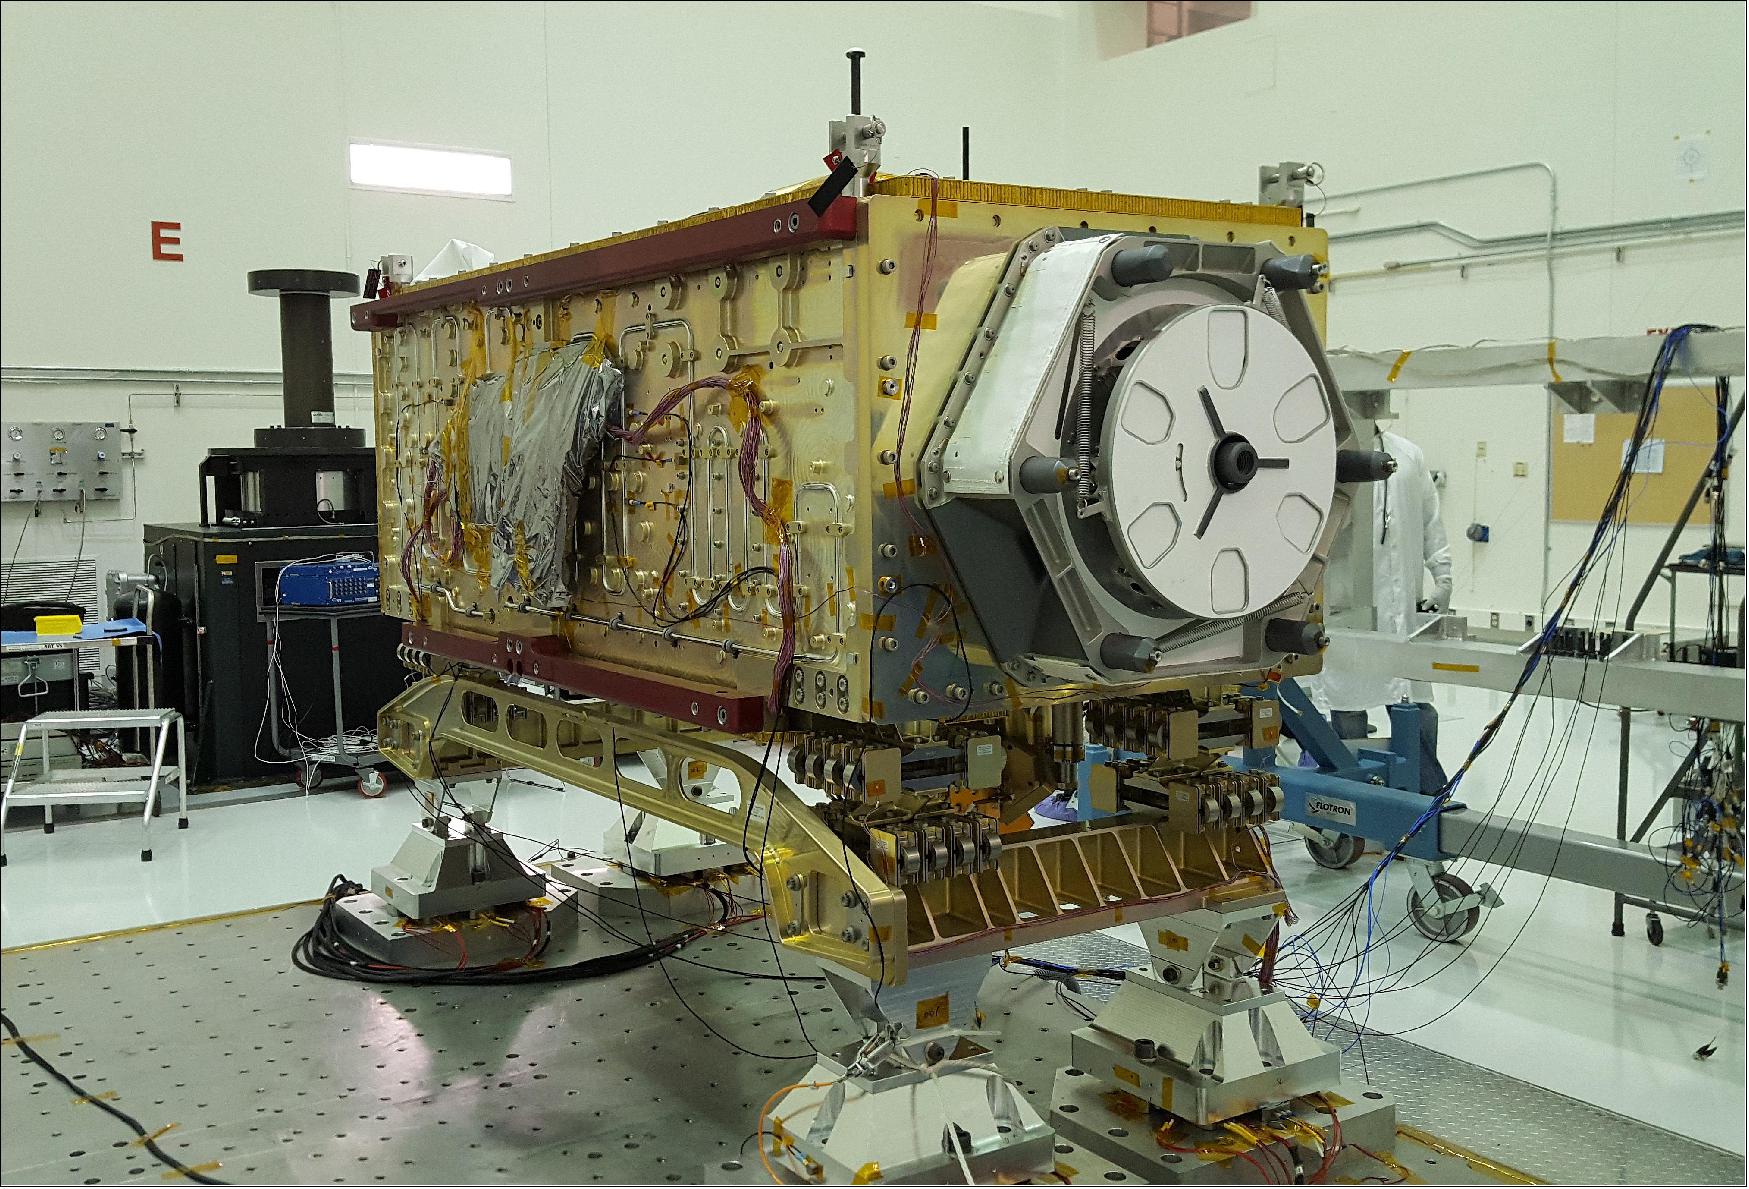 Figure 15: OCO-3 sits on the large vibration table (known as the "shaker") in the Environmental Test Lab at the Jet Propulsion Laboratory. The exposed wires lead to sensors used during dynamics and thermal-vacuum testing. Thermal blankets will be added to the instrument at Kennedy Space Center, where a Space-X Dragon capsule carrying OCO-3 will launch in on a Falcon 9 rocket to the space station on May 1, 2019 (image credit: NASA/JPL-Caltech) 18)